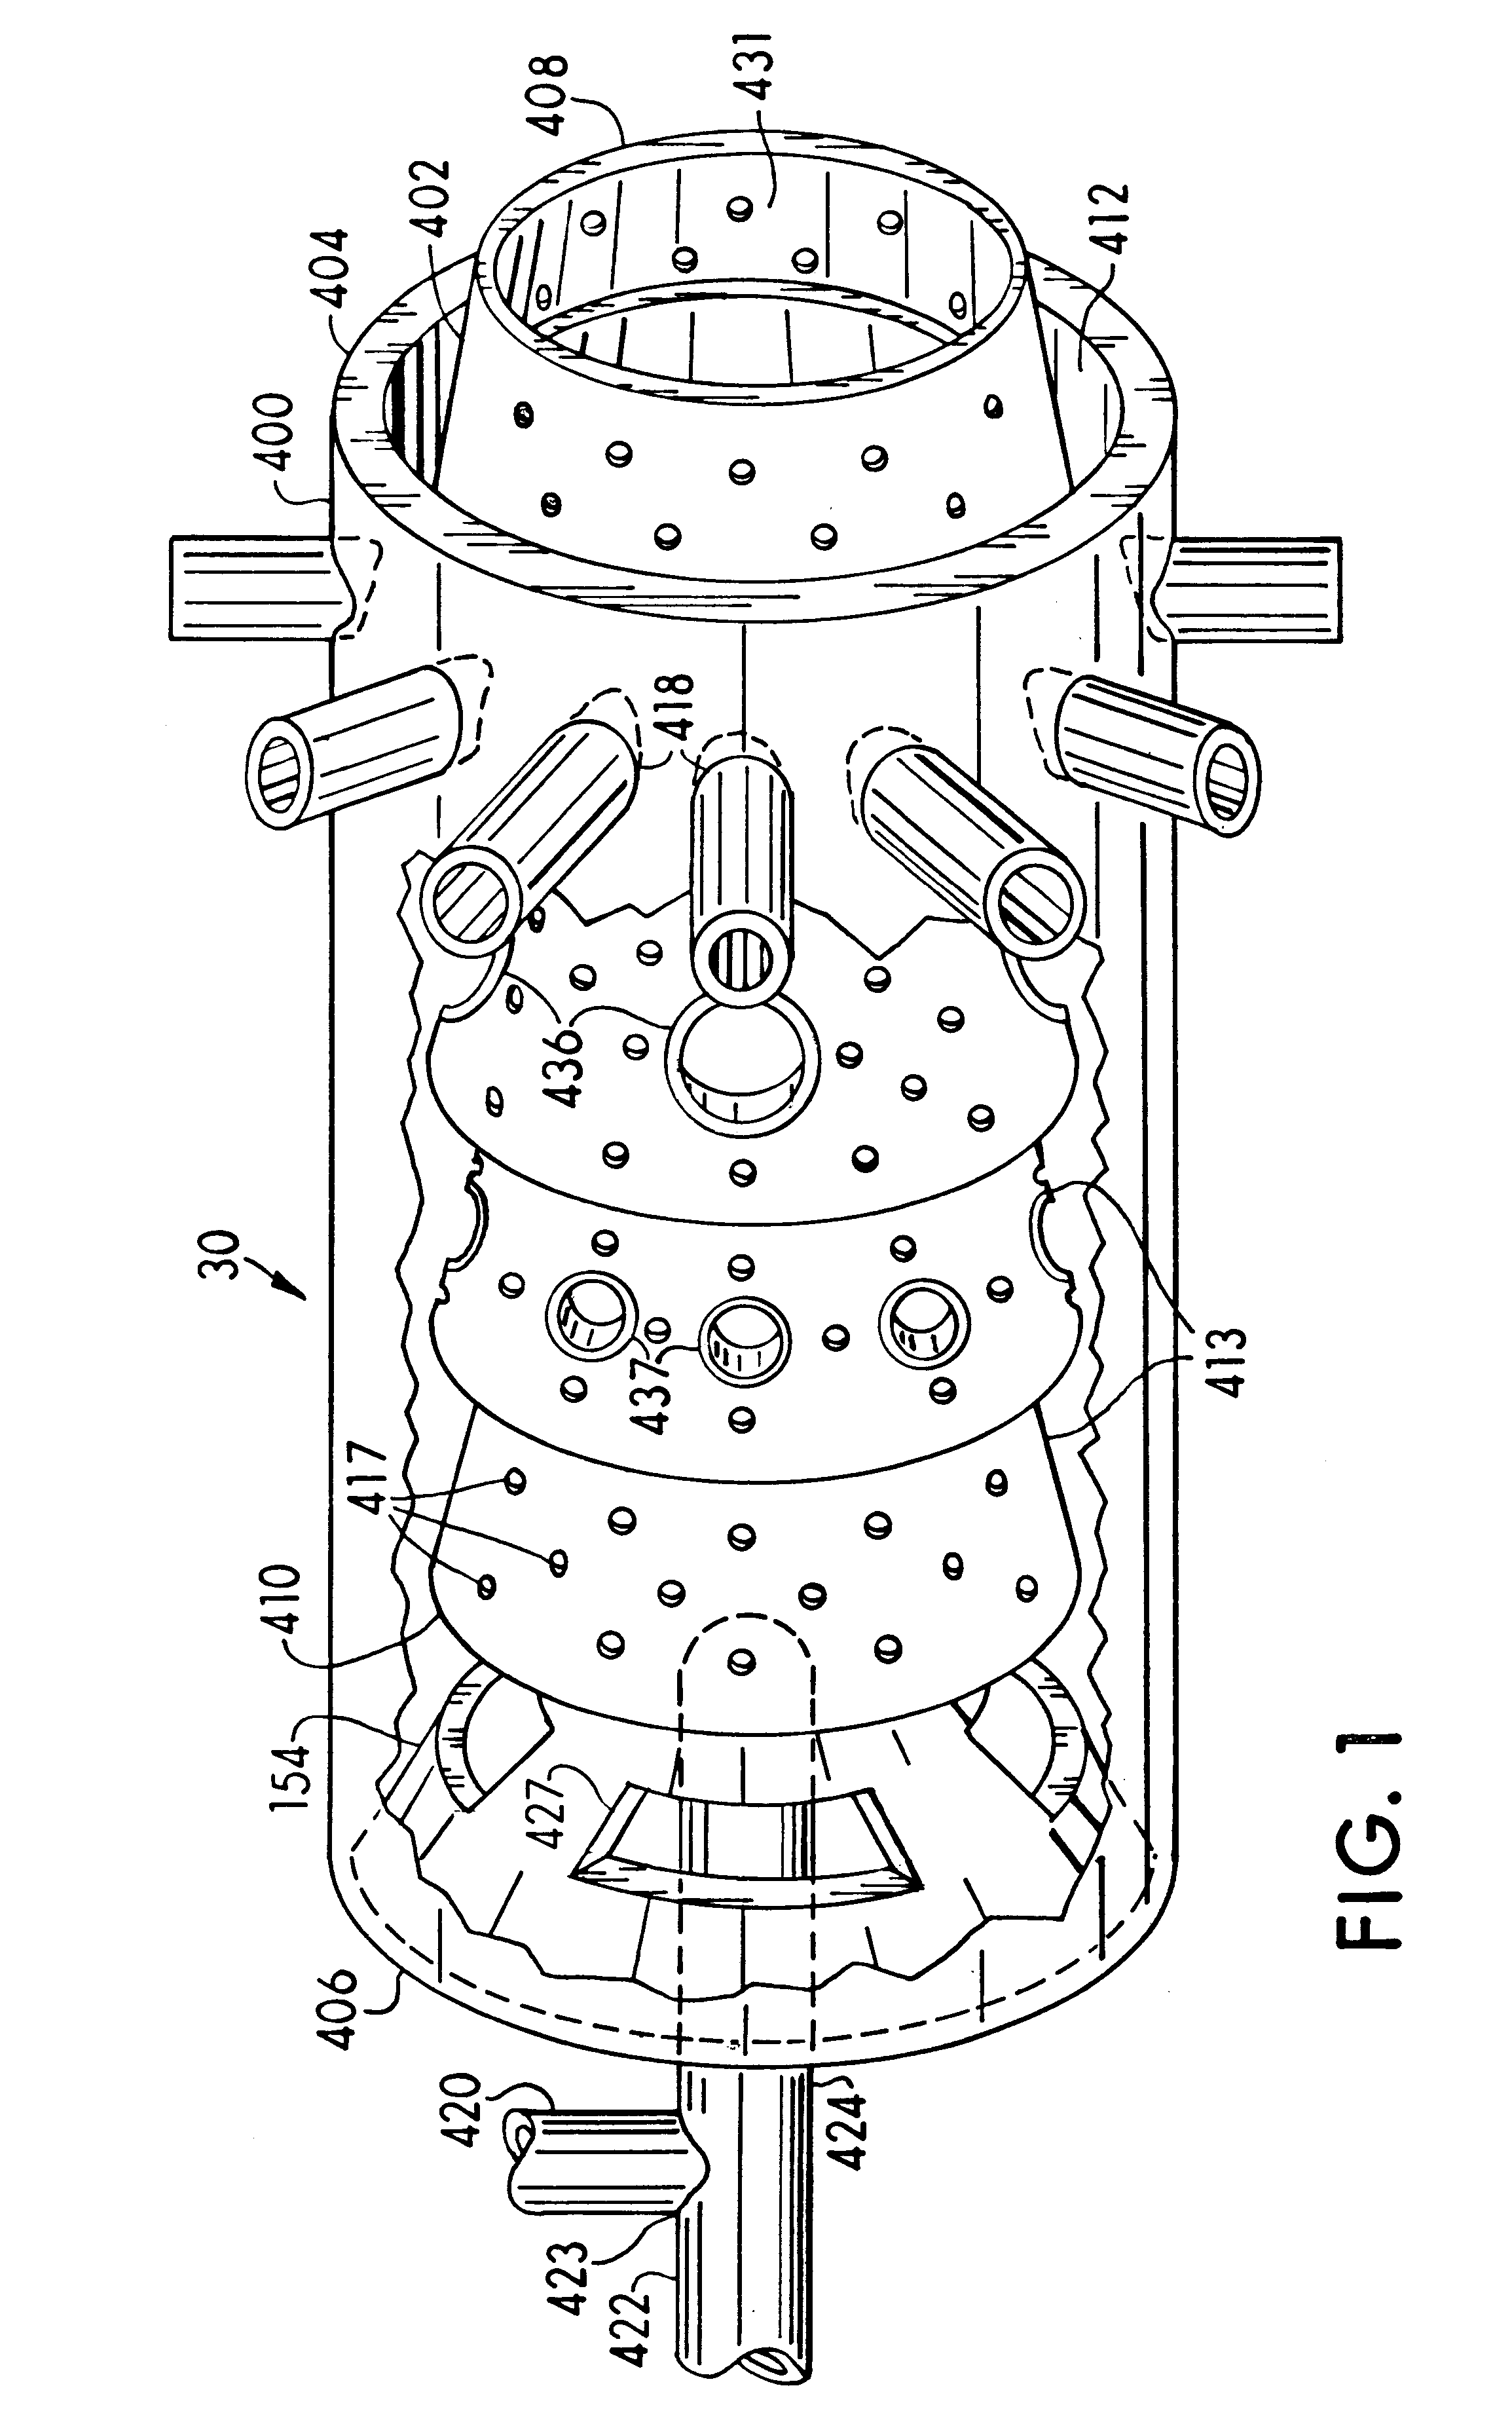 Staged combustion of a low heating value fuel gas for driving a gas turbine